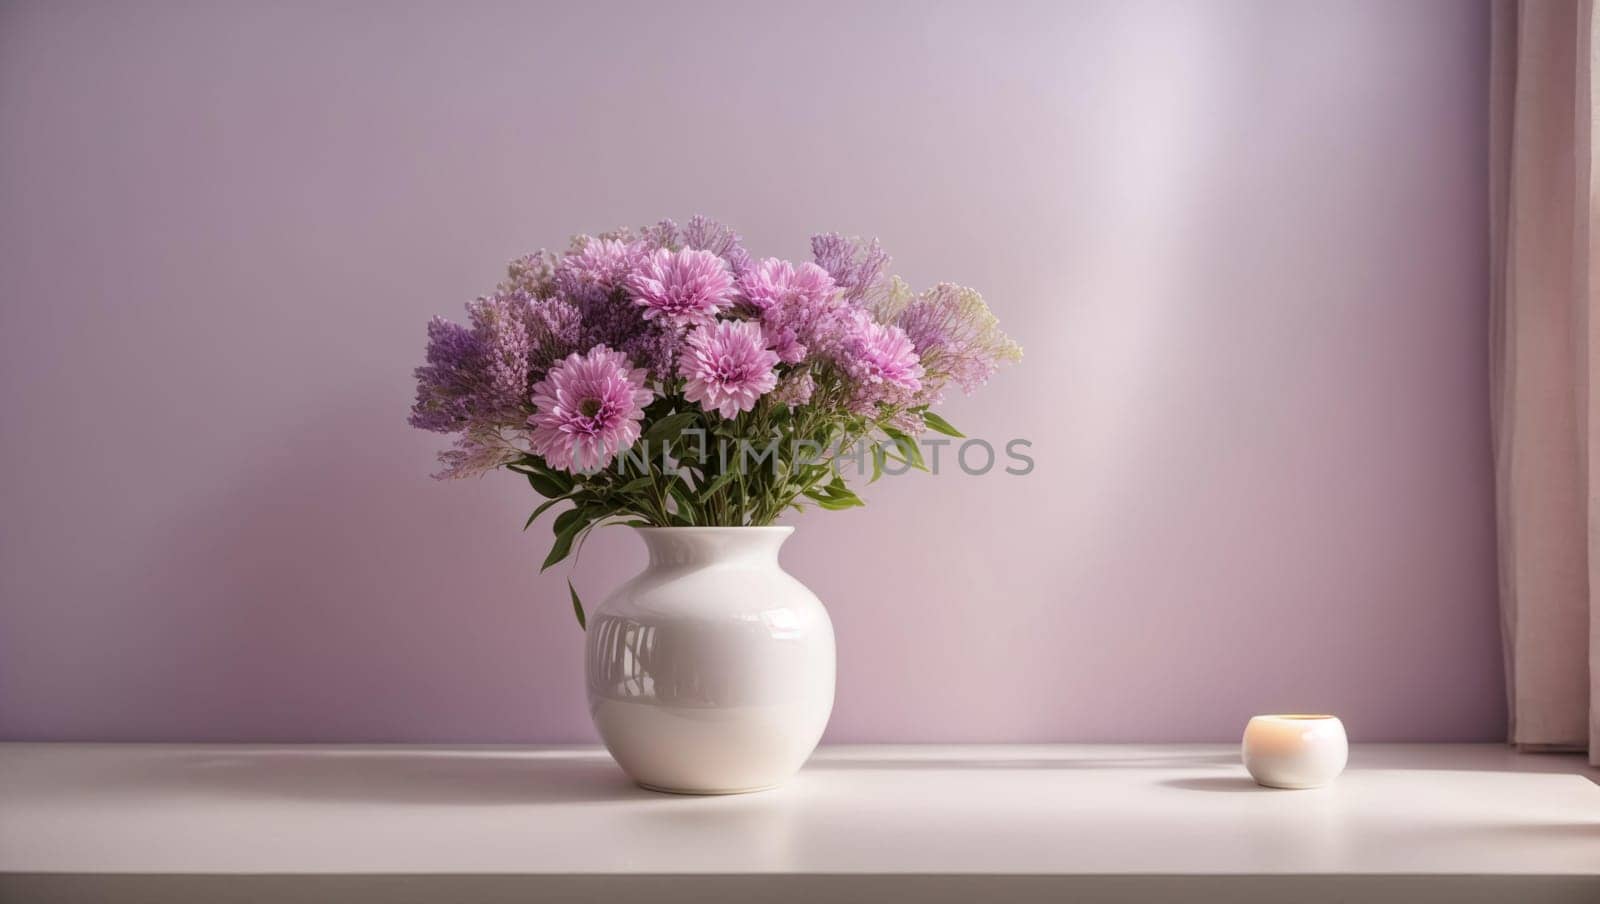 blank wall template with vase and flowers on light purple, pastel background,